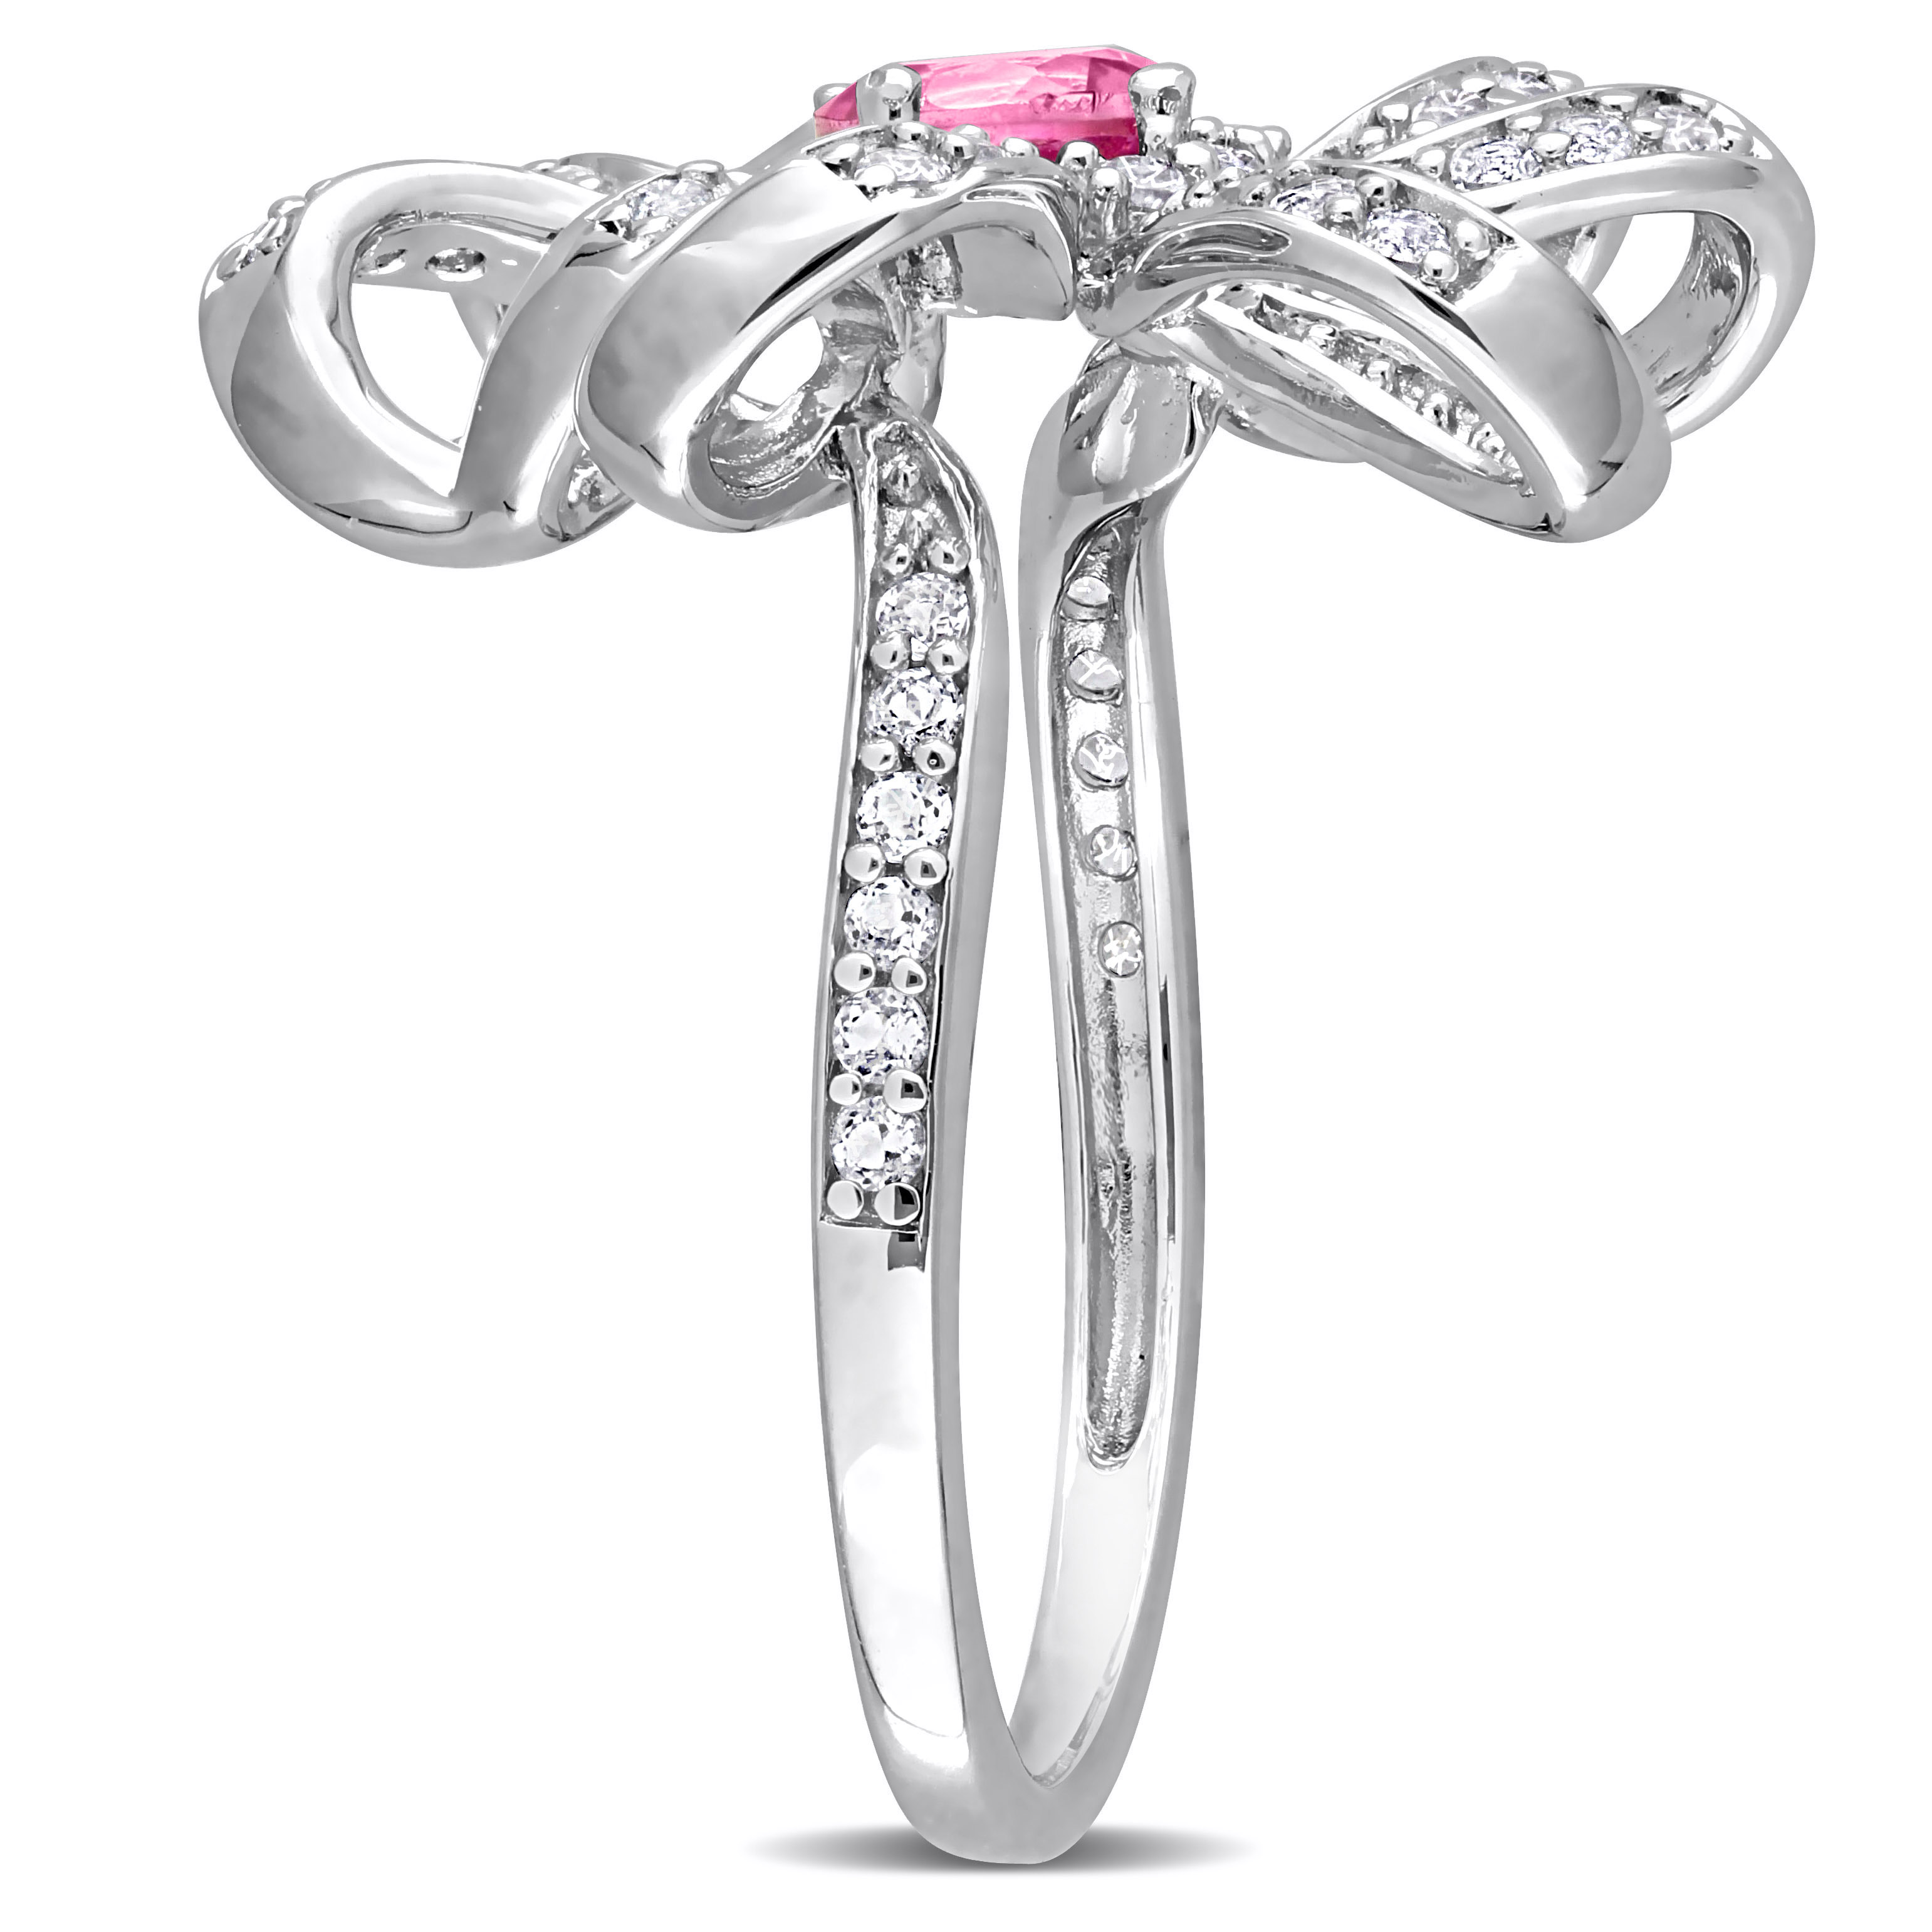 1 1/10 CT TGW Pink Topaz and White Topaz Flower Cocktail Ring in Sterling Silver